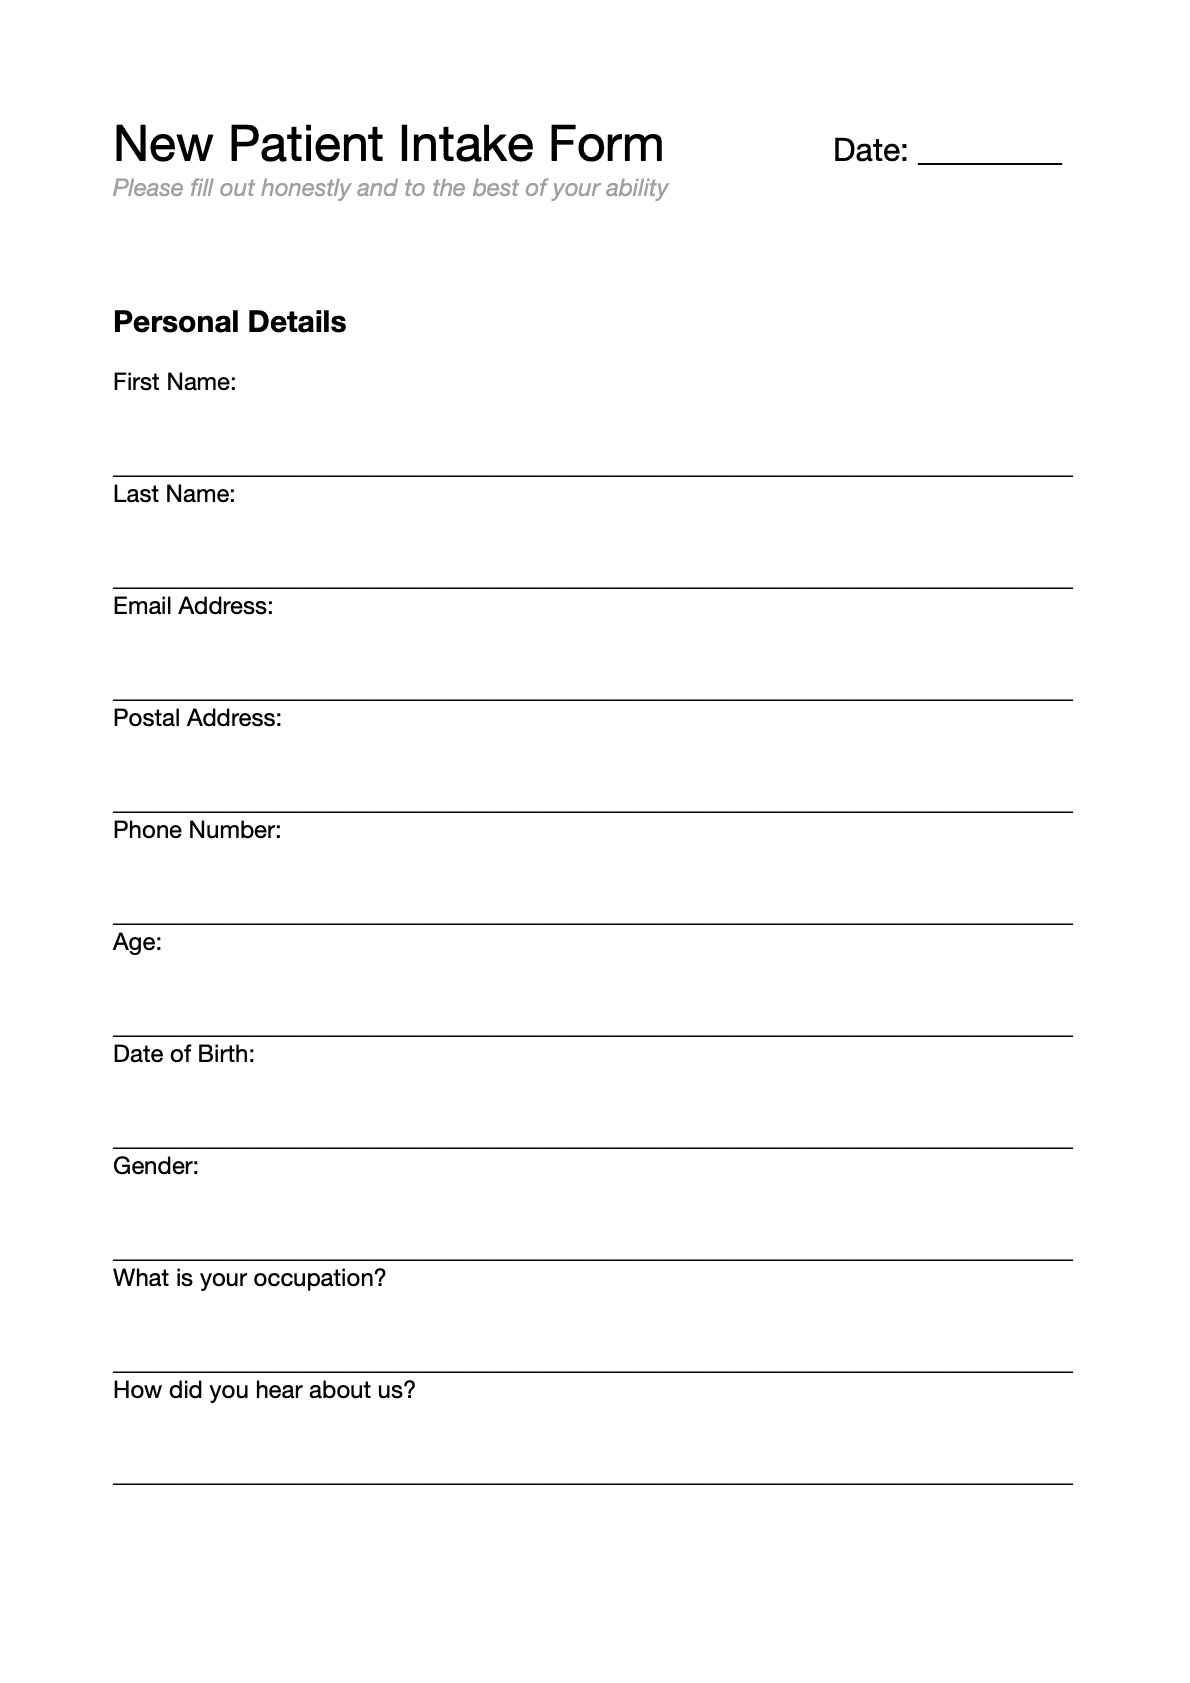 New Patient Intake Form - Natural Health Connections